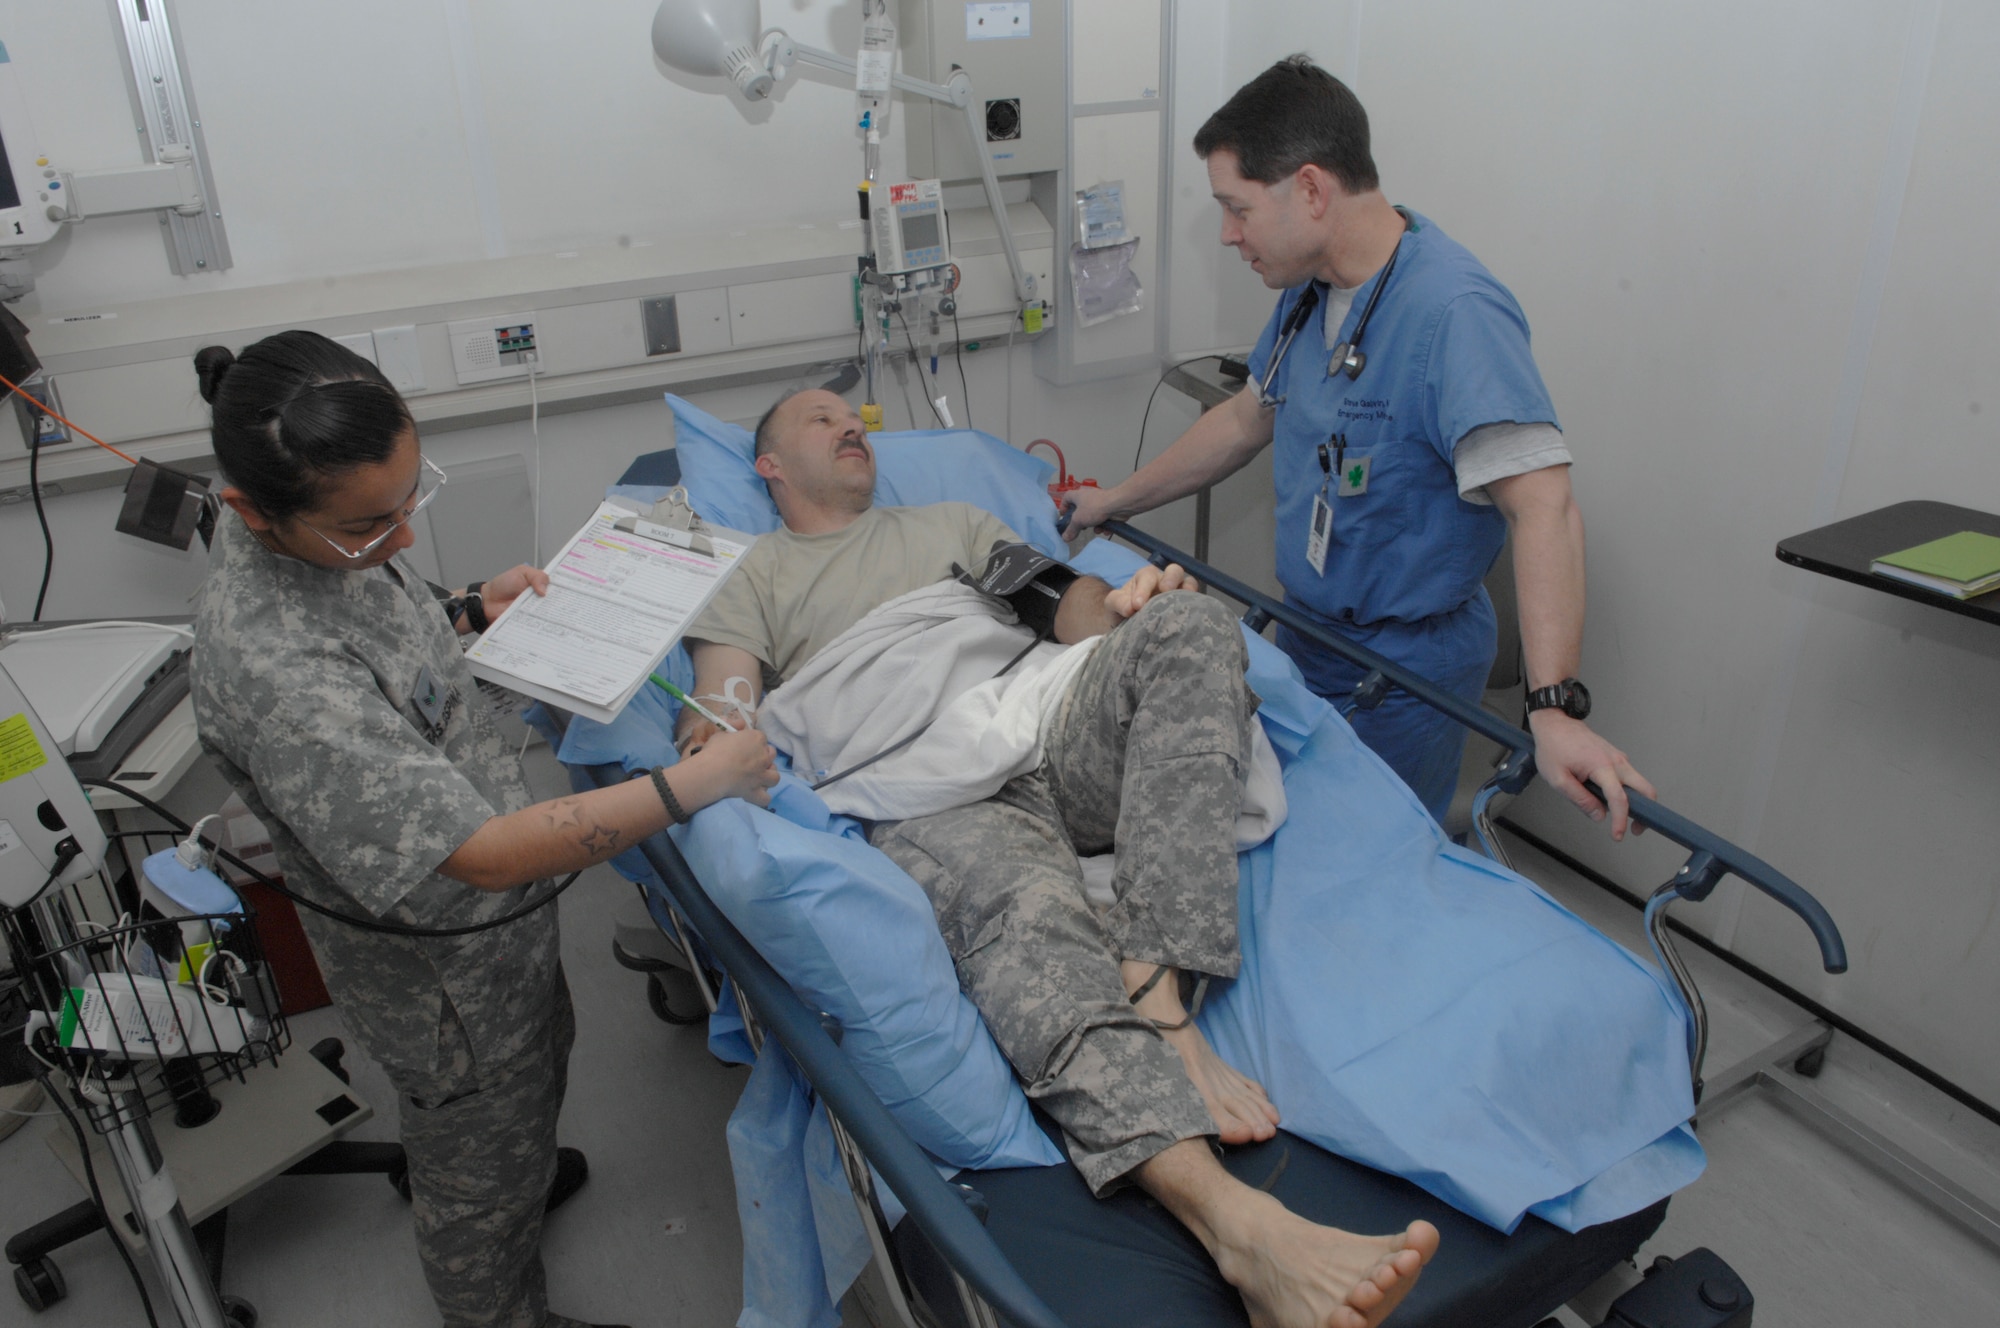 BAGRAM AIRFIELD, Afghanistan -- Senior Airman Diana Plazas Ospina, Craig Joint Theater Hospital medical technician, and Lt. Col. (Dr.) Stephen Galvin, CJTH emergency medicine flight commander, check on Army Sgt. 1st Class George Watson who is a patient in the emergency room. The medical team at the CJTH provide care to Bagram and all forward operating bases in Afghanistan. (U.S. Air Force photo/Senior Airman Amber R. Kelly-Herard)